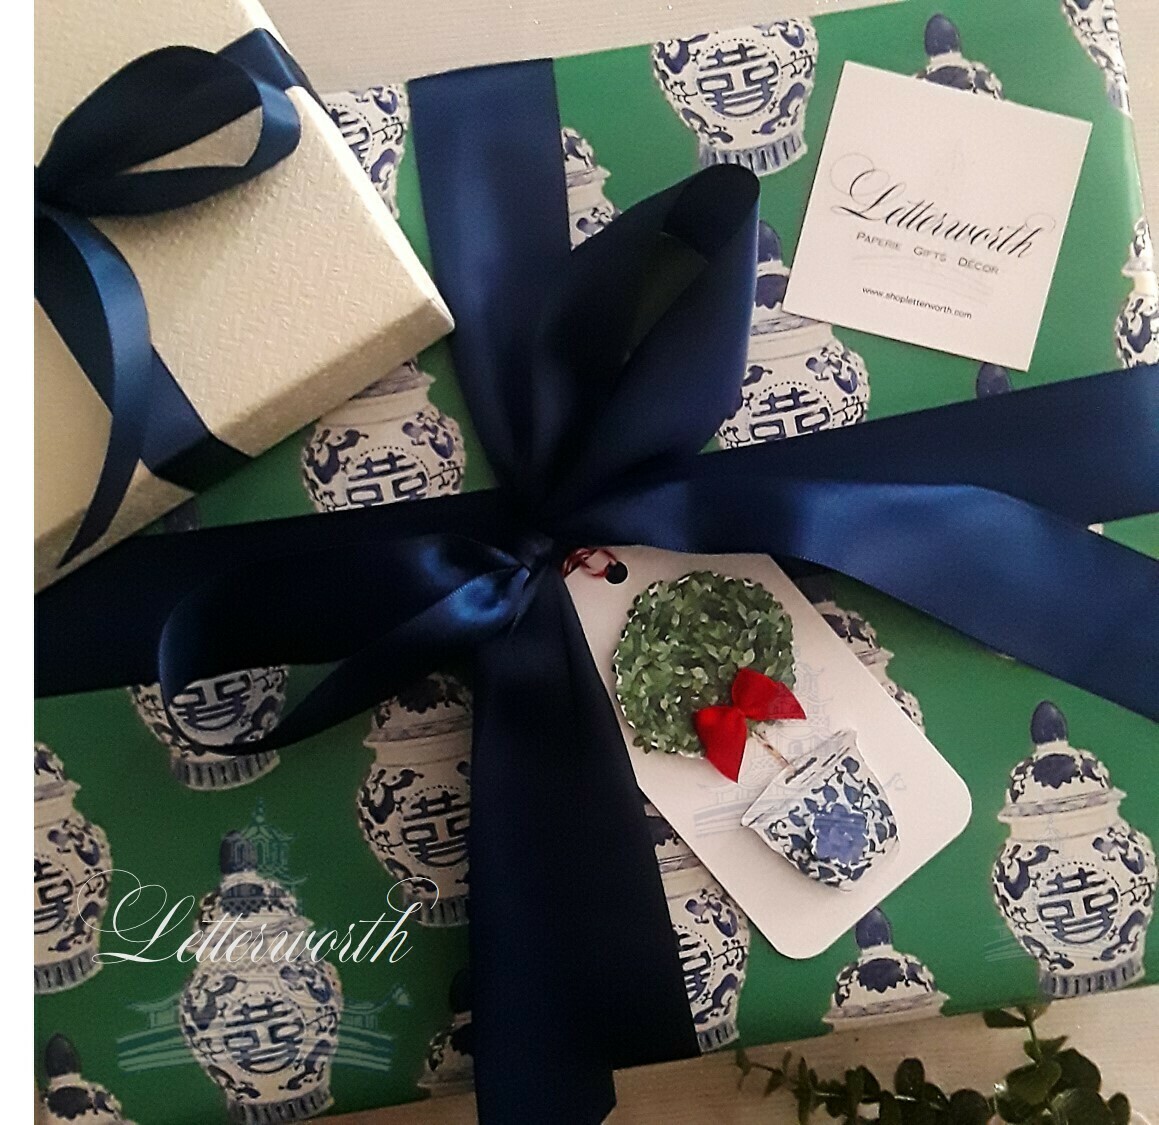 Blue and White Chinoiserie Ginger Jar on Kelly Green Gift Wrapping Paper by Letterworth